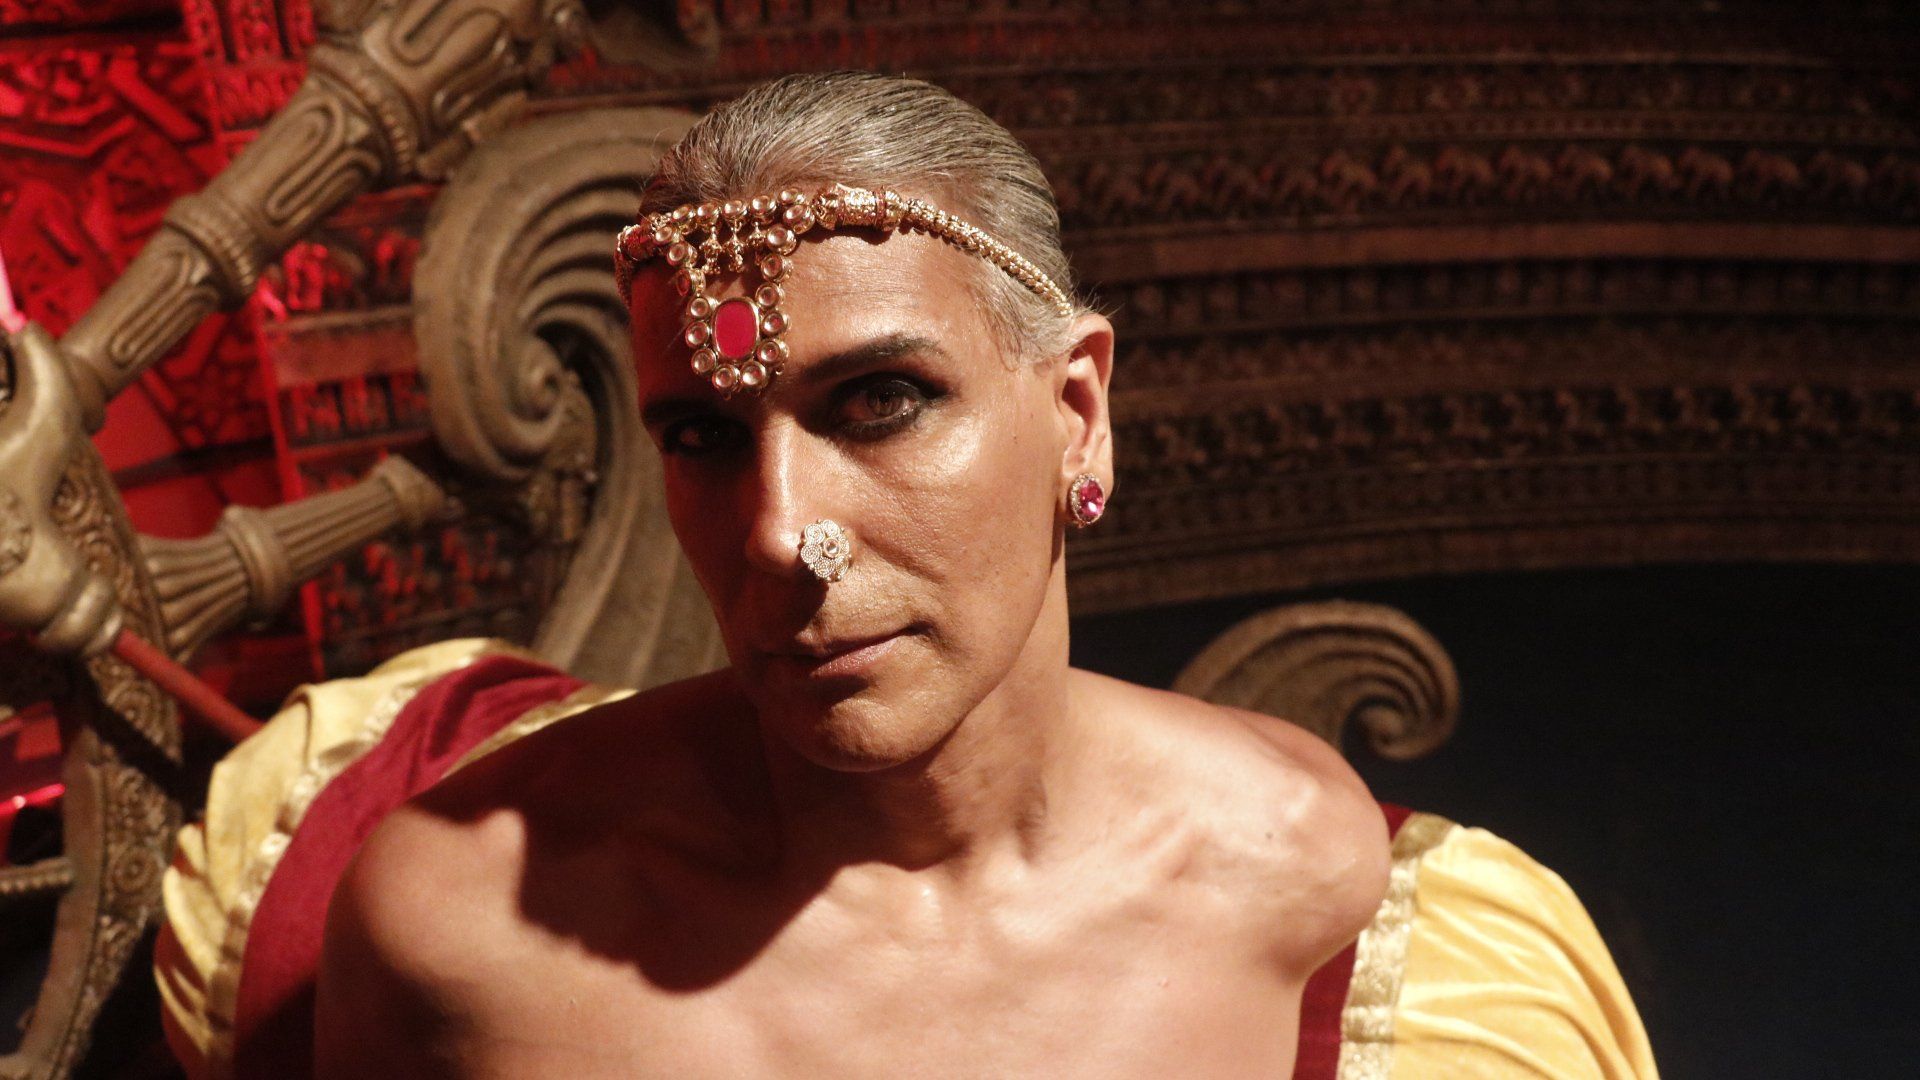 Milind Soman shares jaw-dropping first look from ‘Paurashpur’, will play third gender